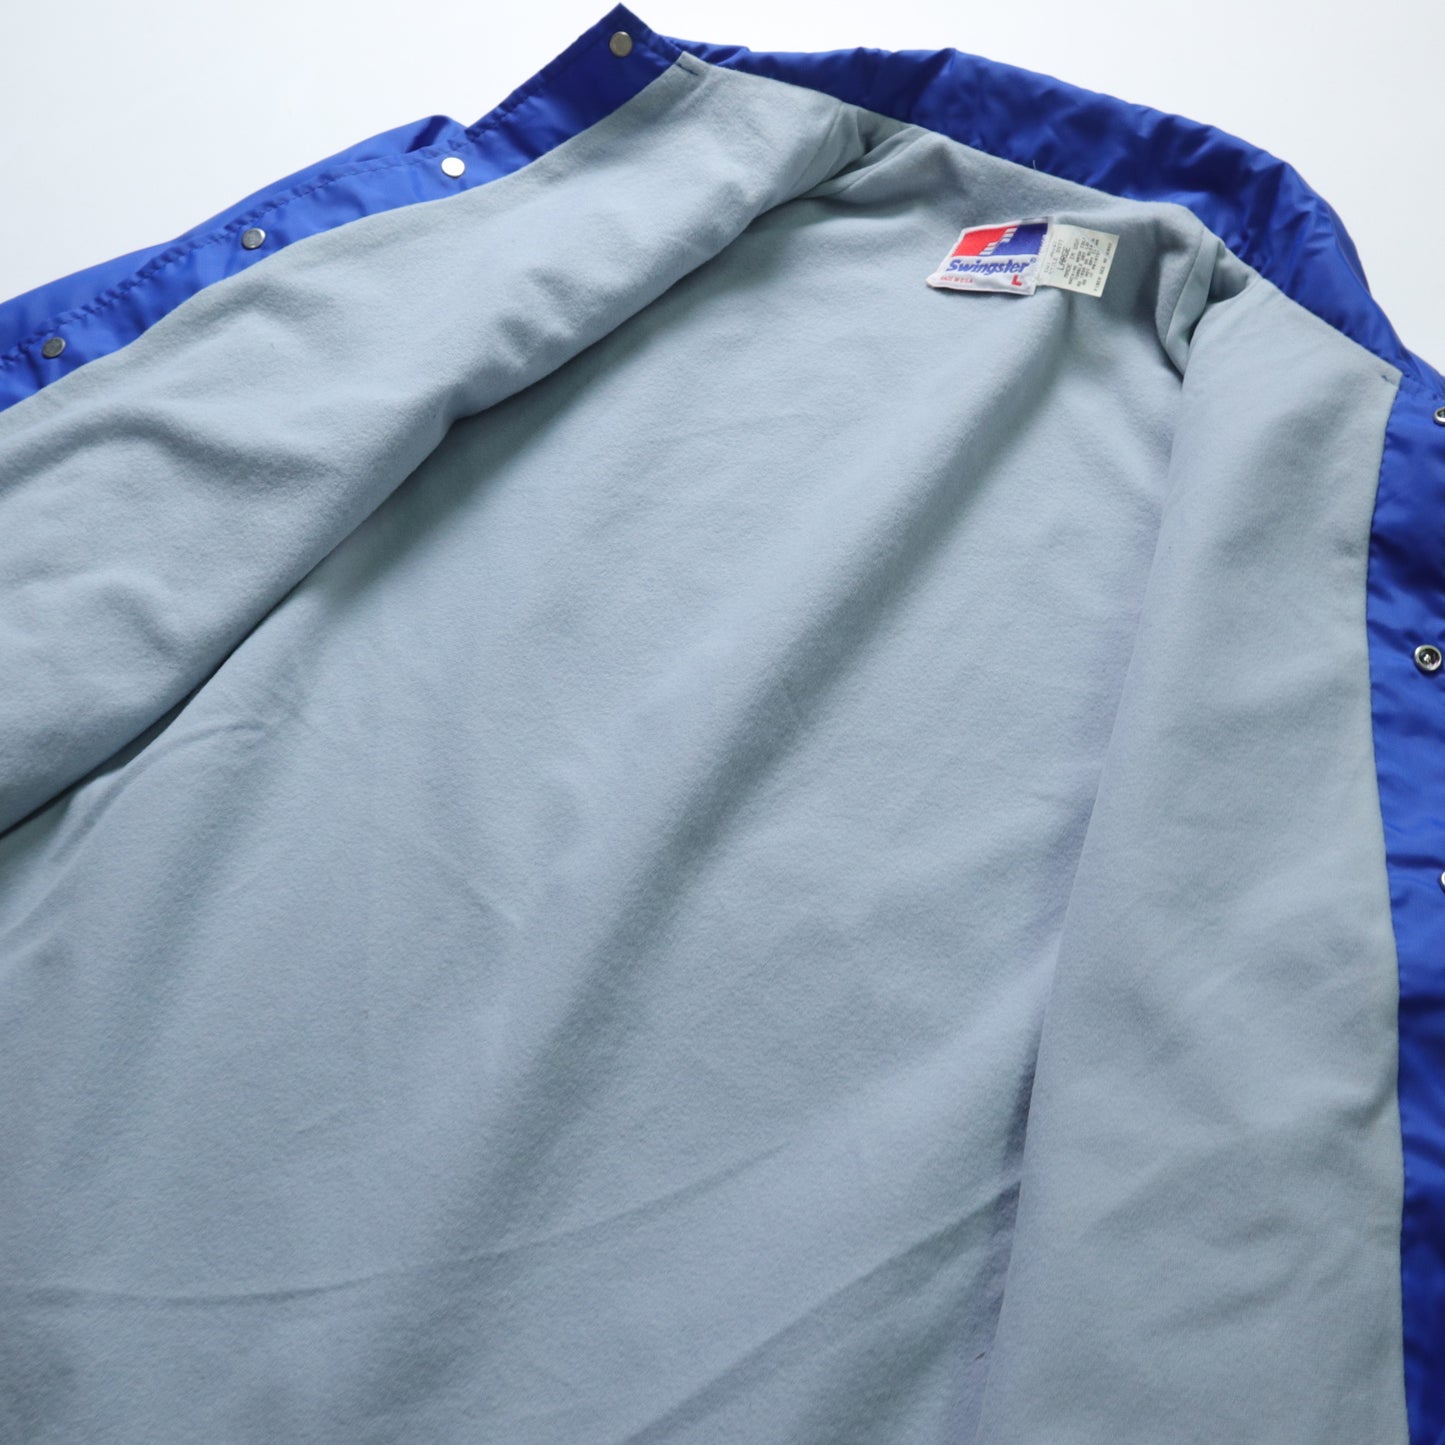 90s American-made Swingster River Bluffs Council Girl Scouts Royal Blue Windproof Coach Jacket